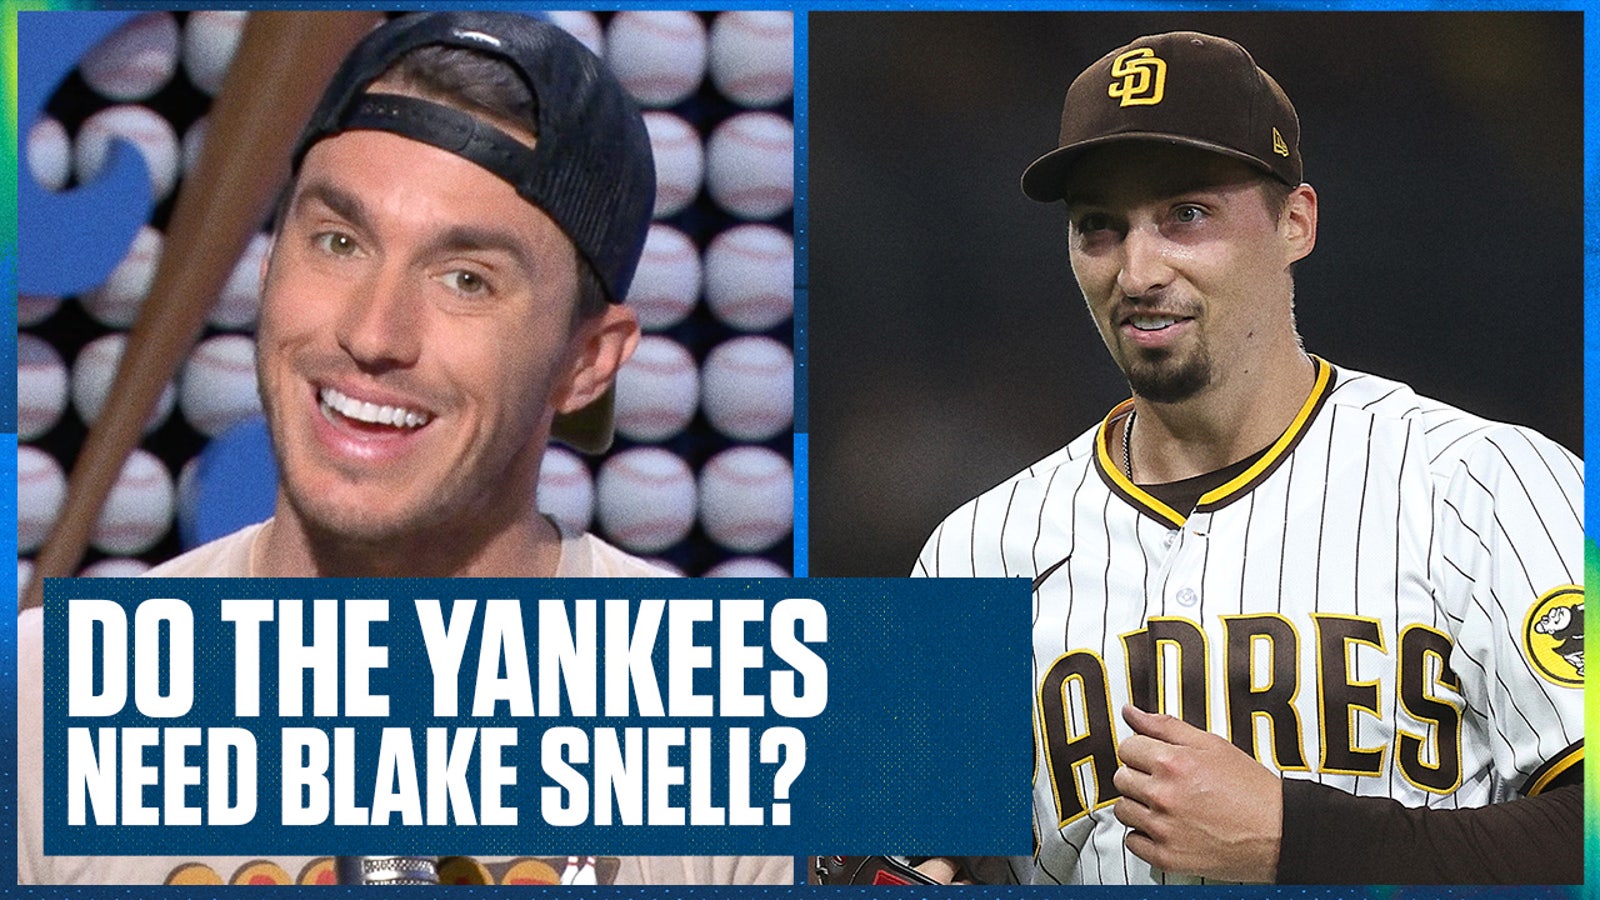 New York Yankees need Blake Snell after Gerrit Cole MRI